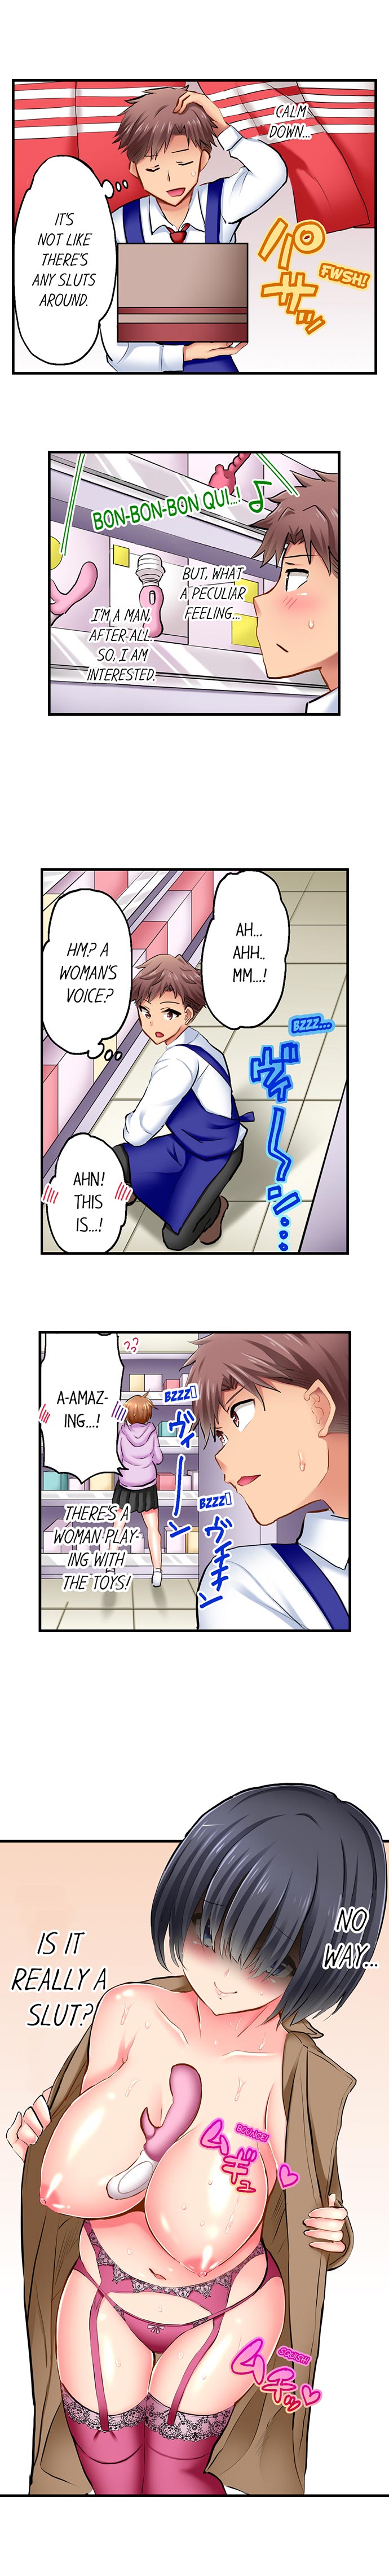 Sex in the Adult Toys Section - Chapter 1 Page 8